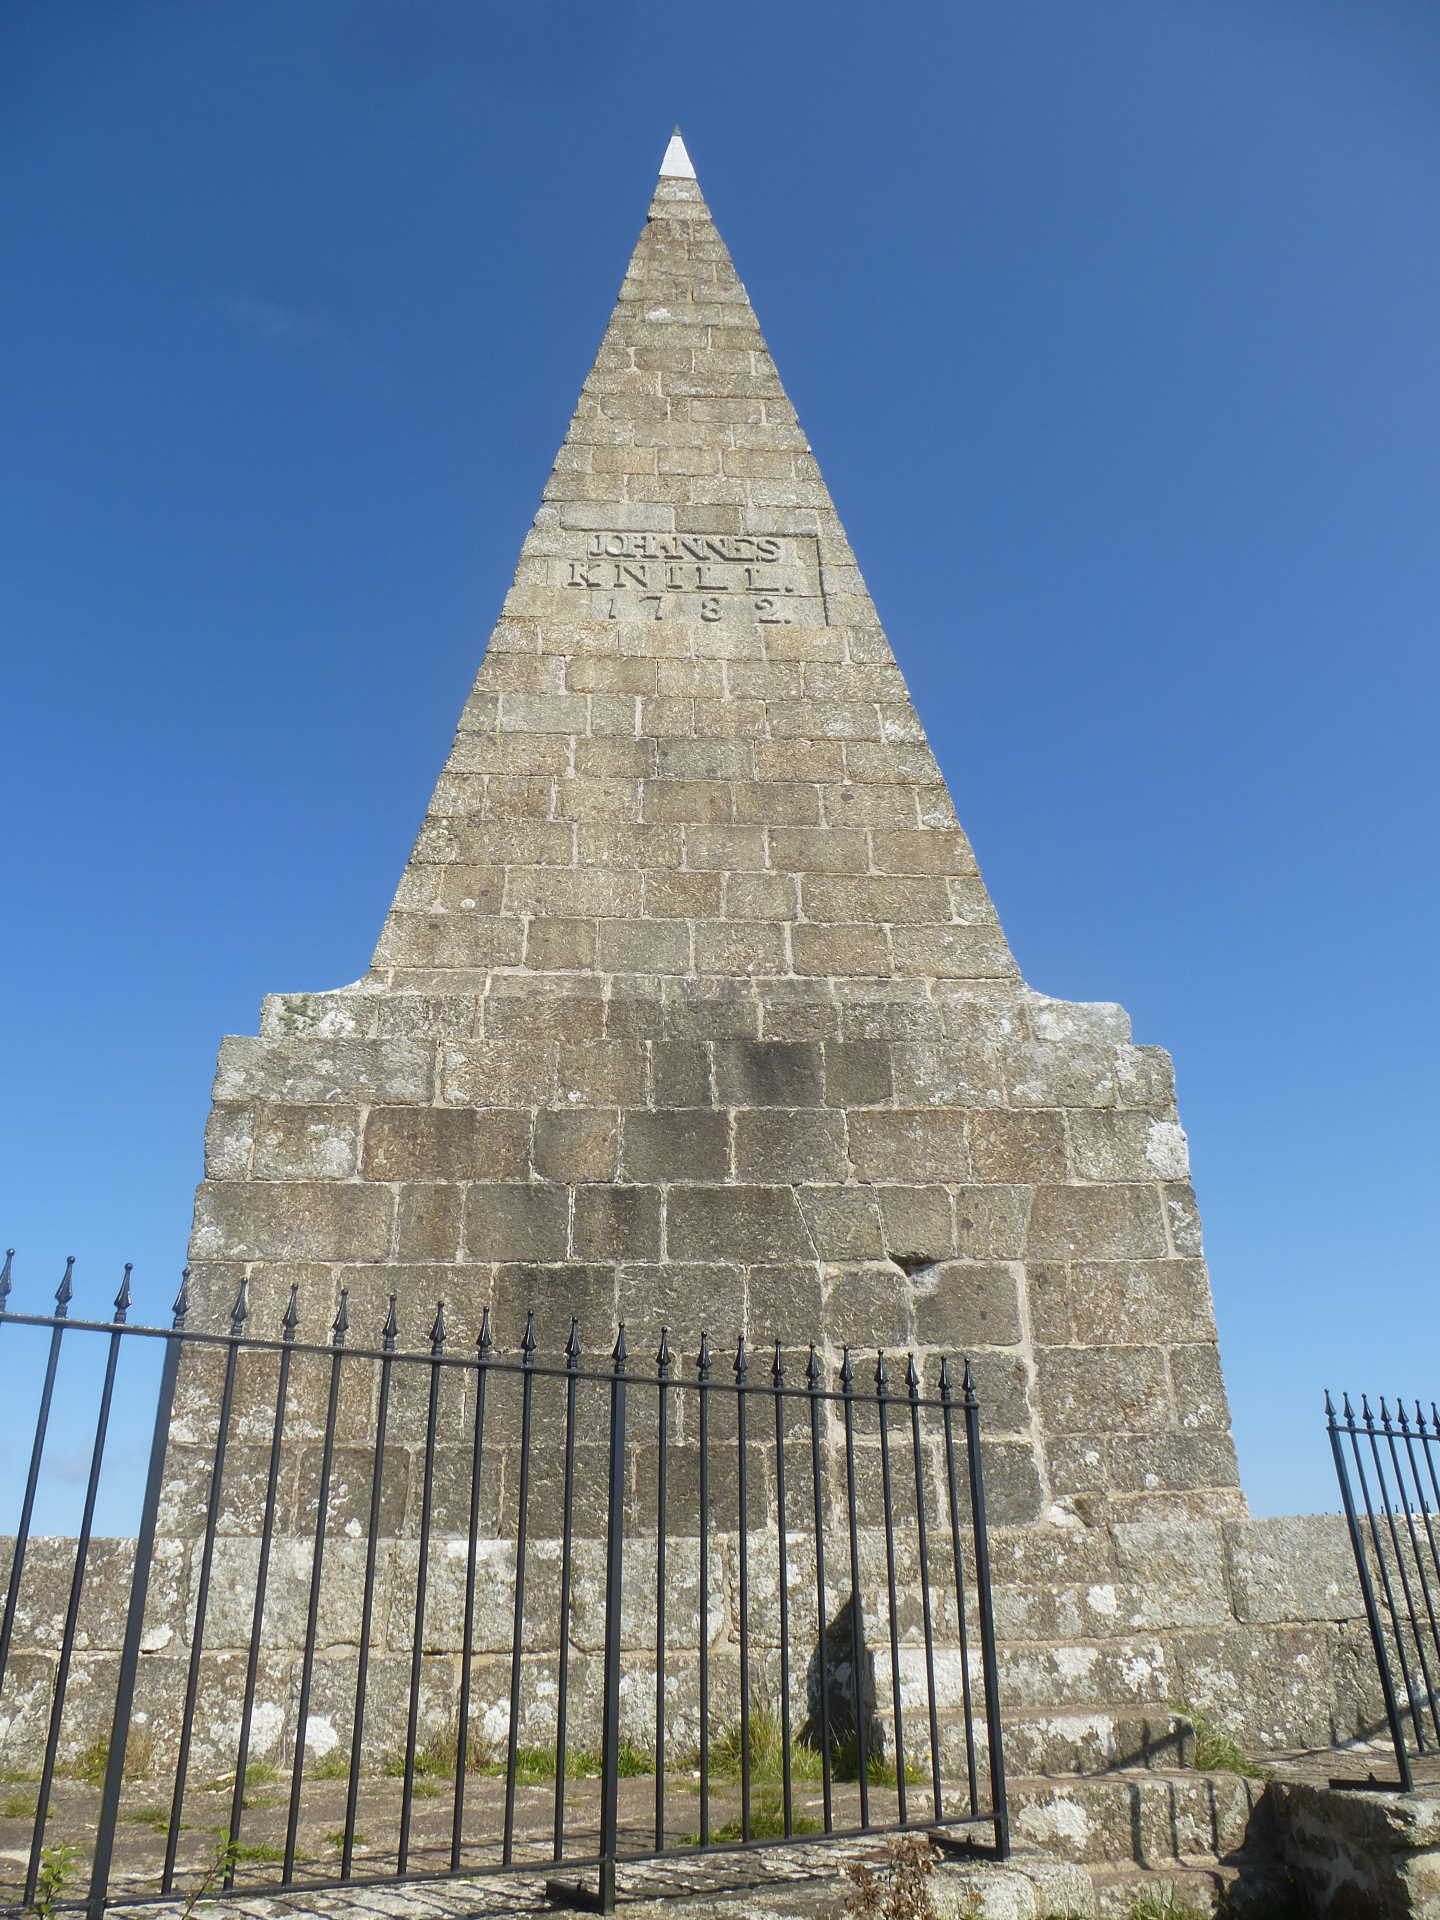 A triangular stone monument with the date 1782.